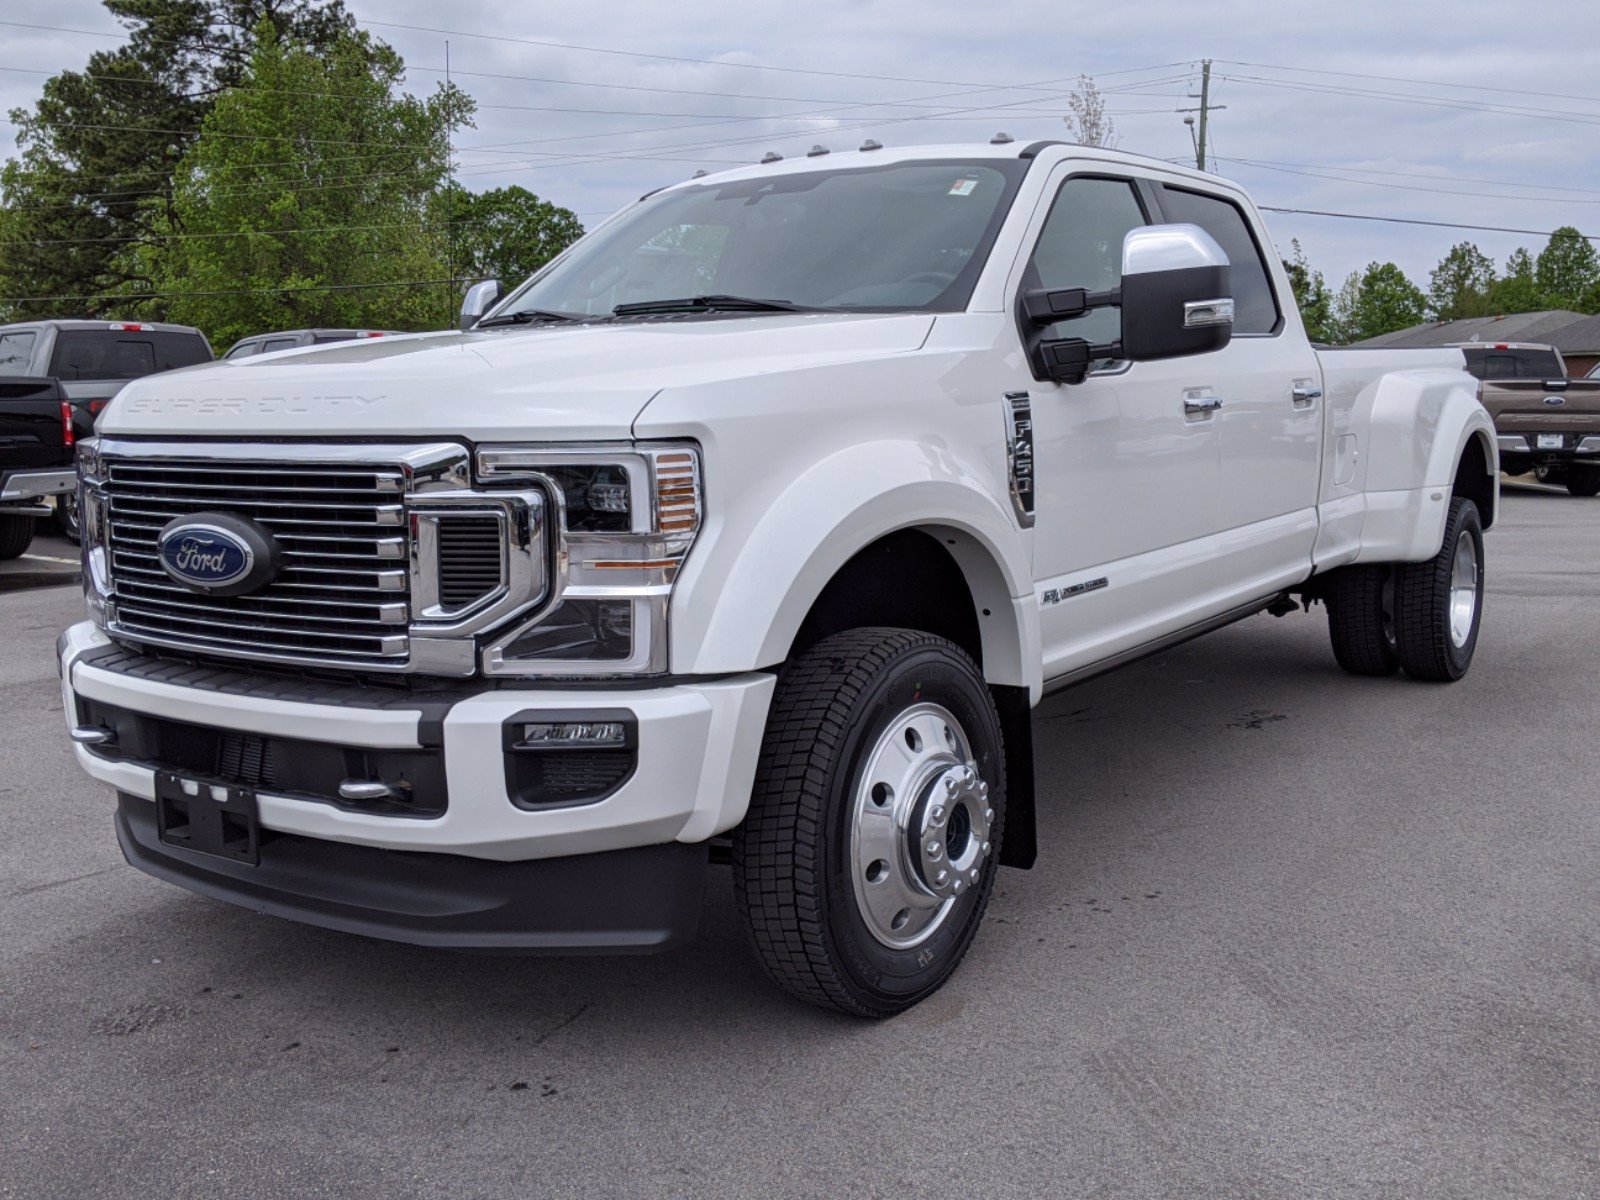 New 2020 Ford Super Duty F450 DRW Platinum With Navigation & 4WD